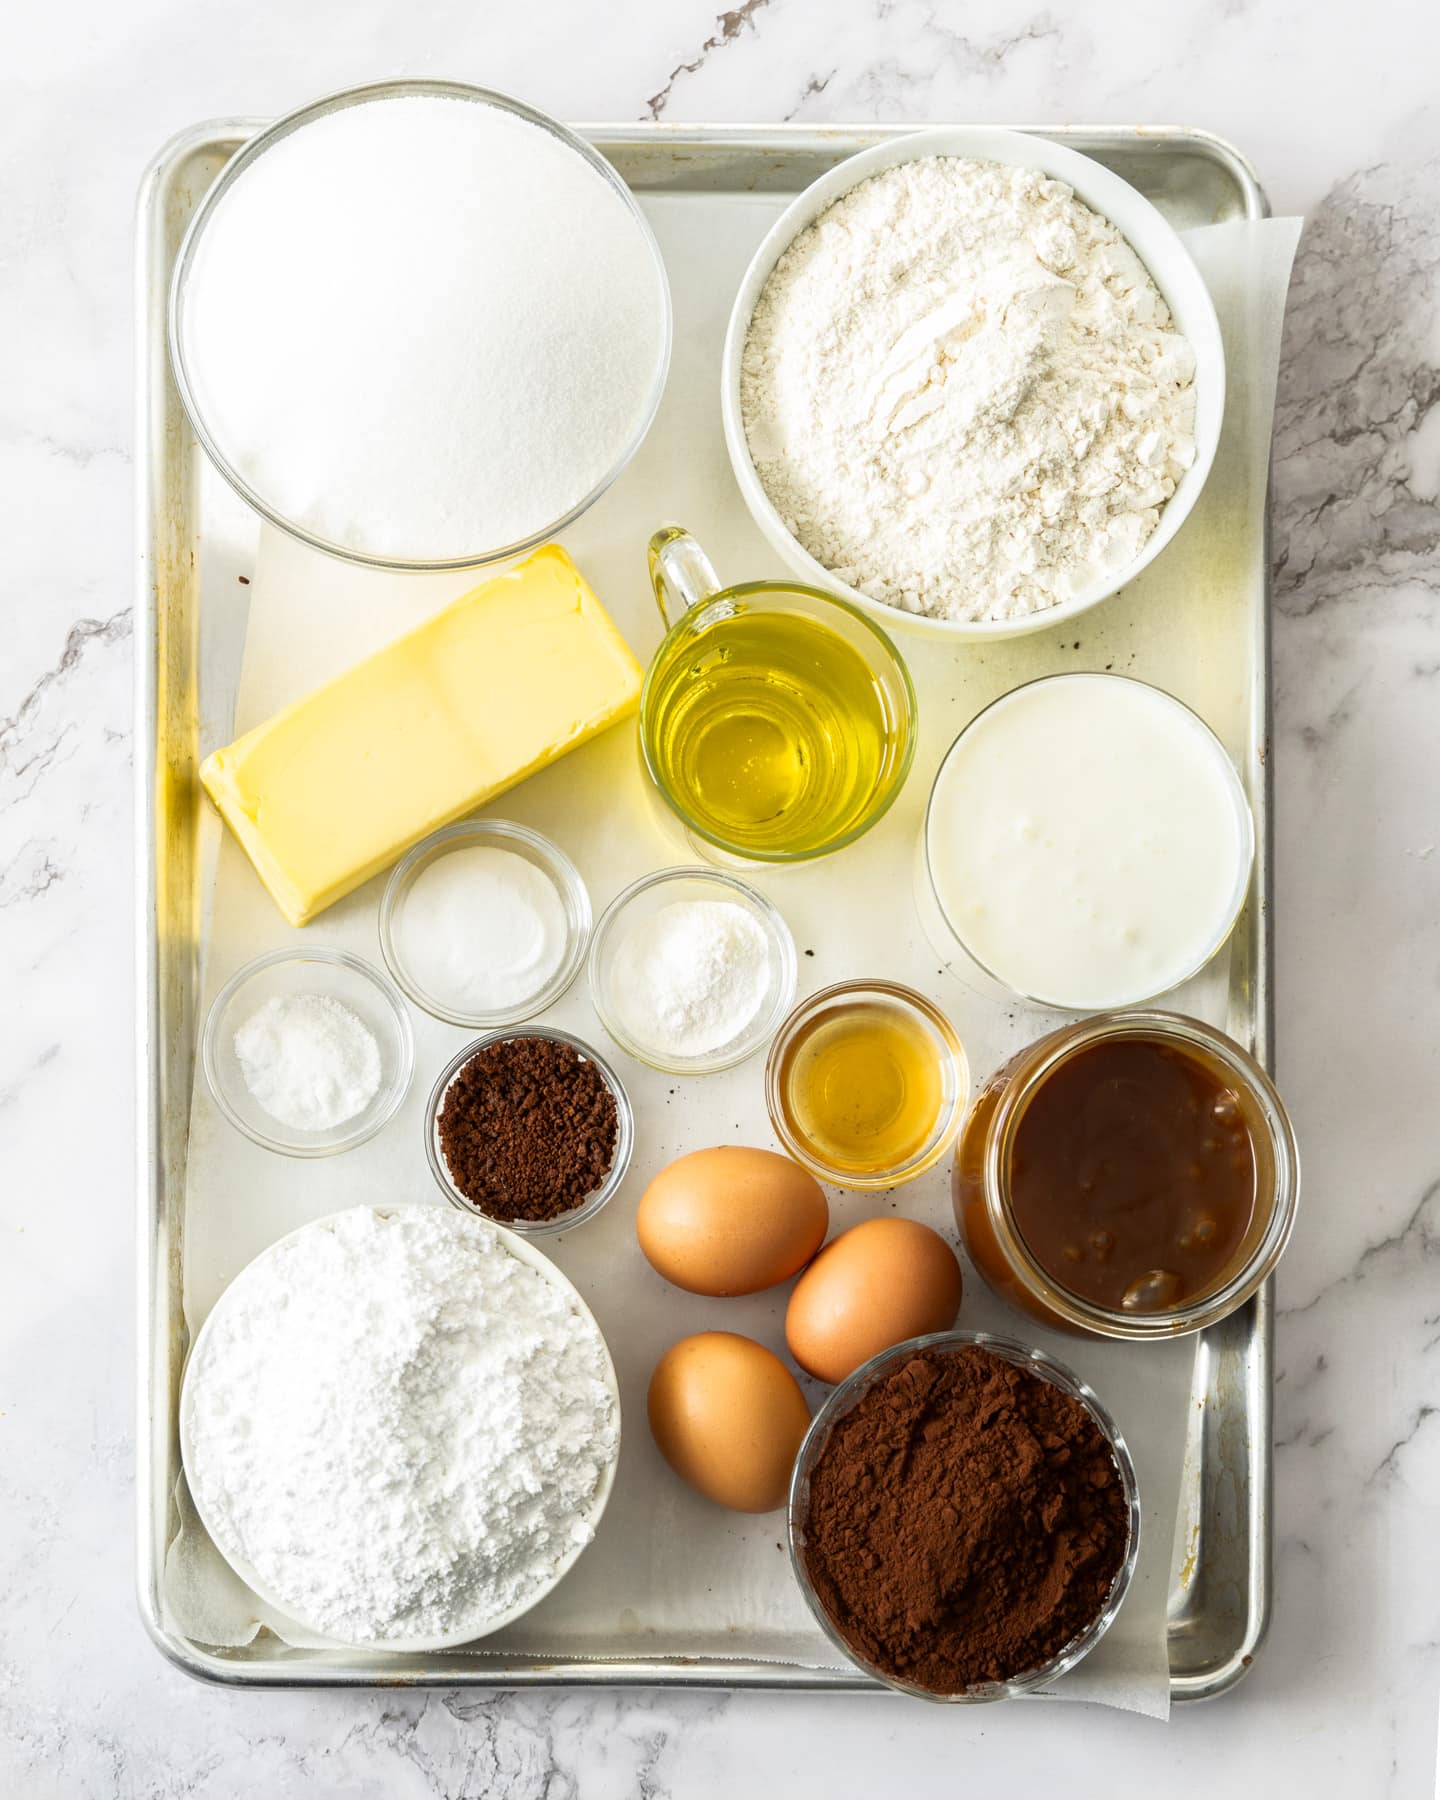 Ingredients for salted caramel chocolate cake on a baking tray.